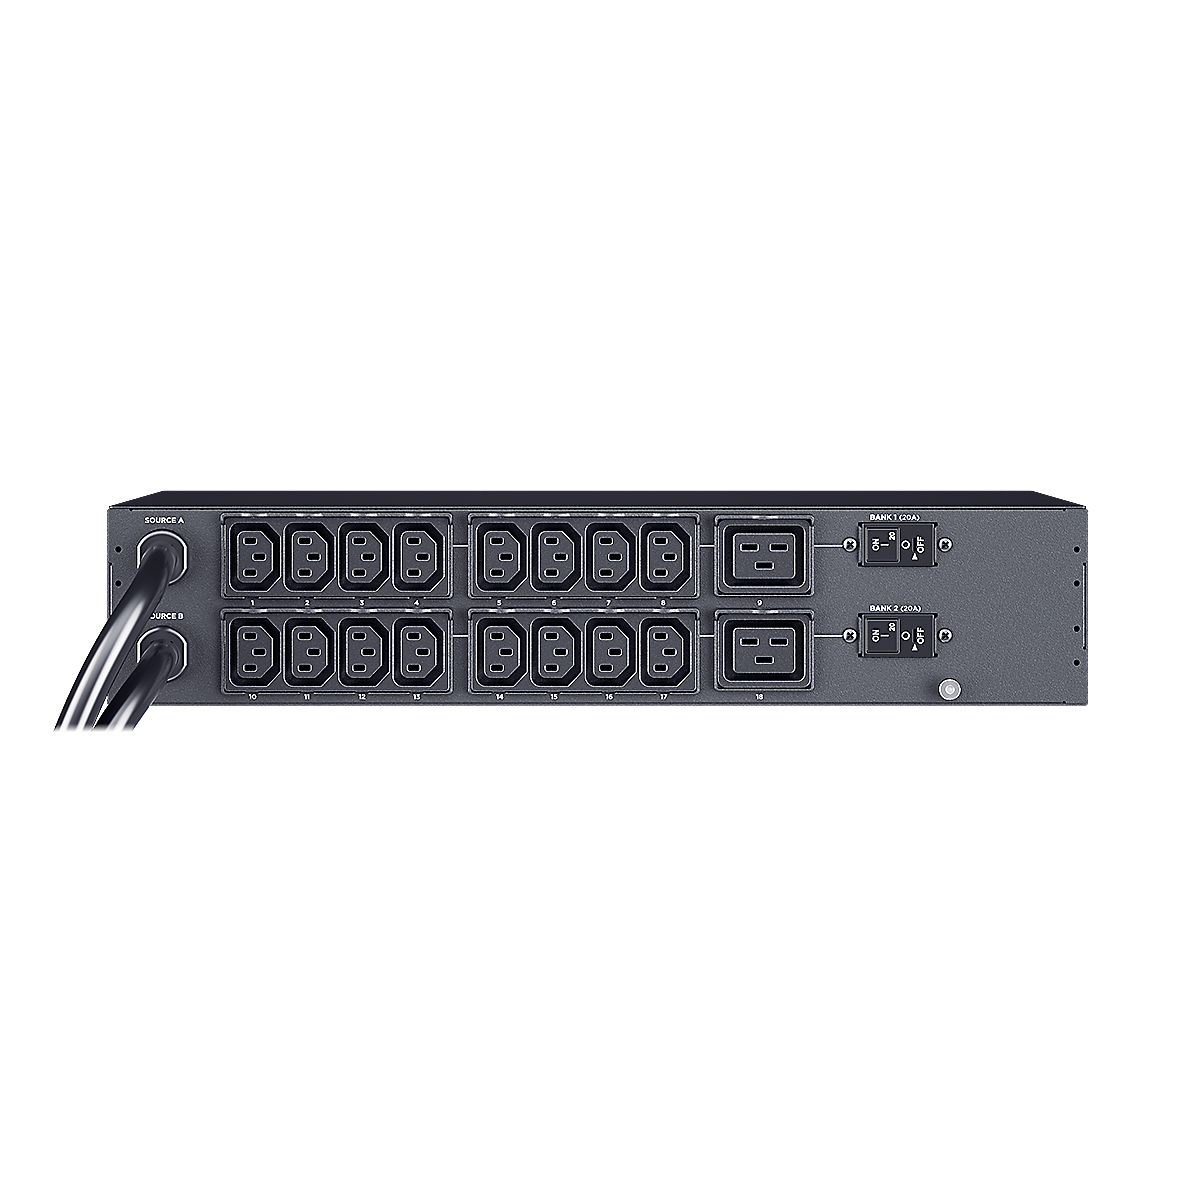 CyberPower Systems Power Distribution Unit - PDU24302